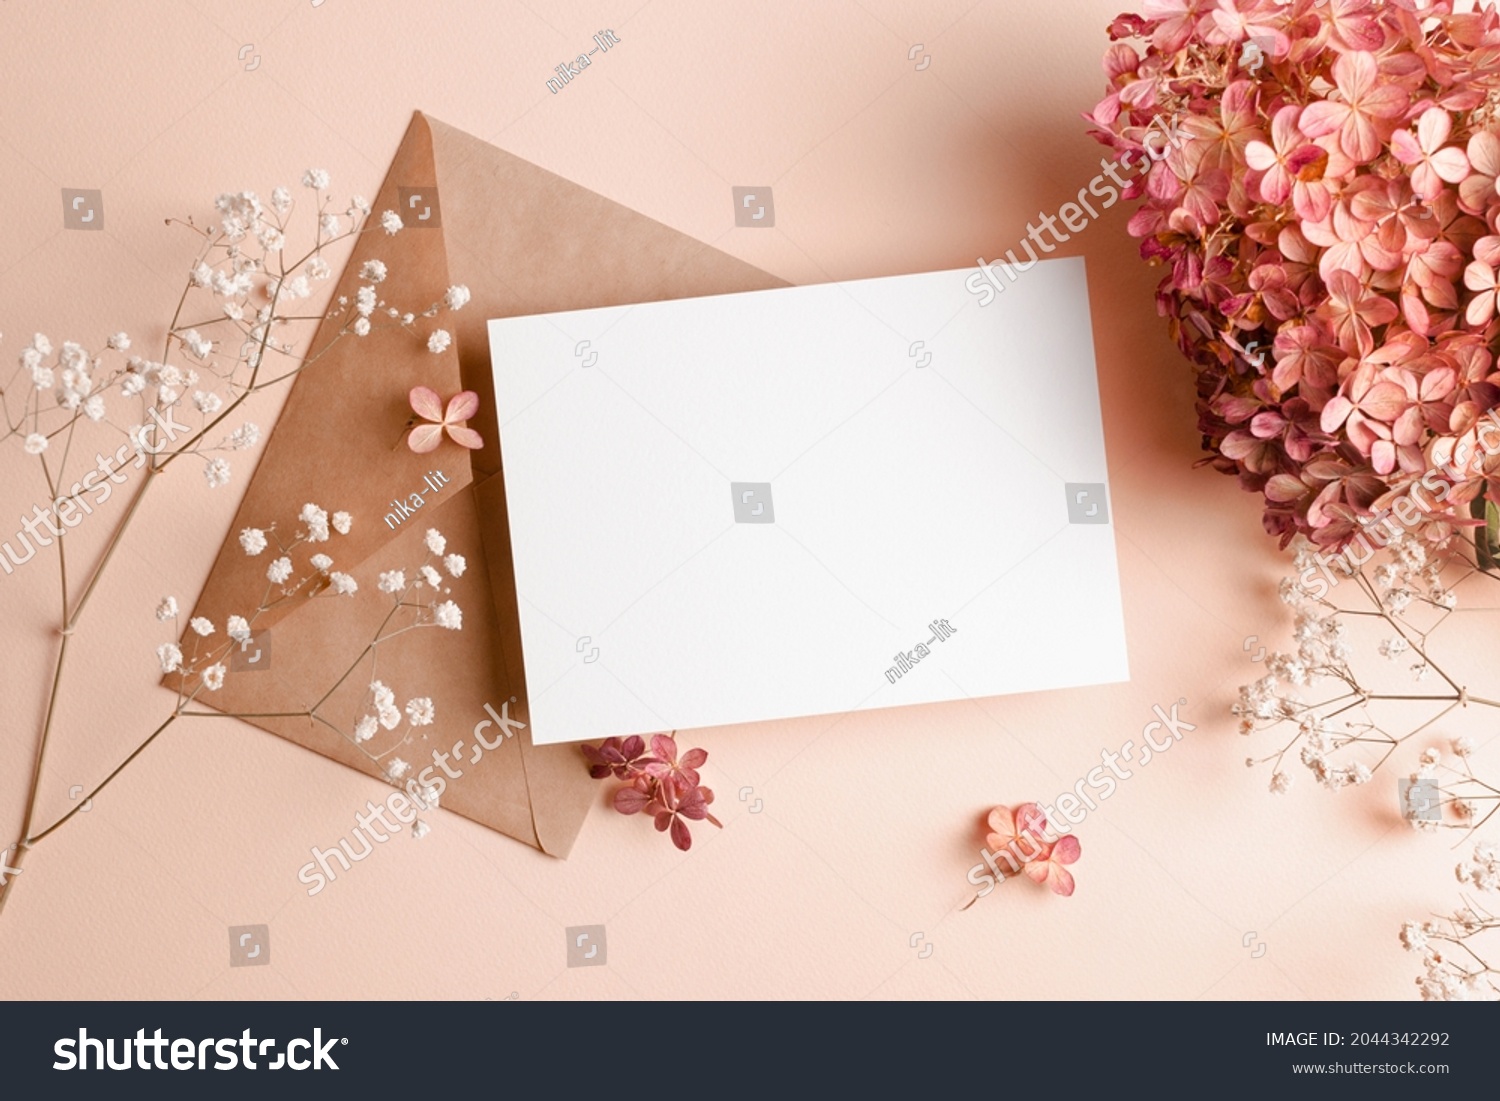 Invitation or greeting card mockup with envelope, hydrangea and gypsophila flowers. Blank card mockup on pink background. #2044342292